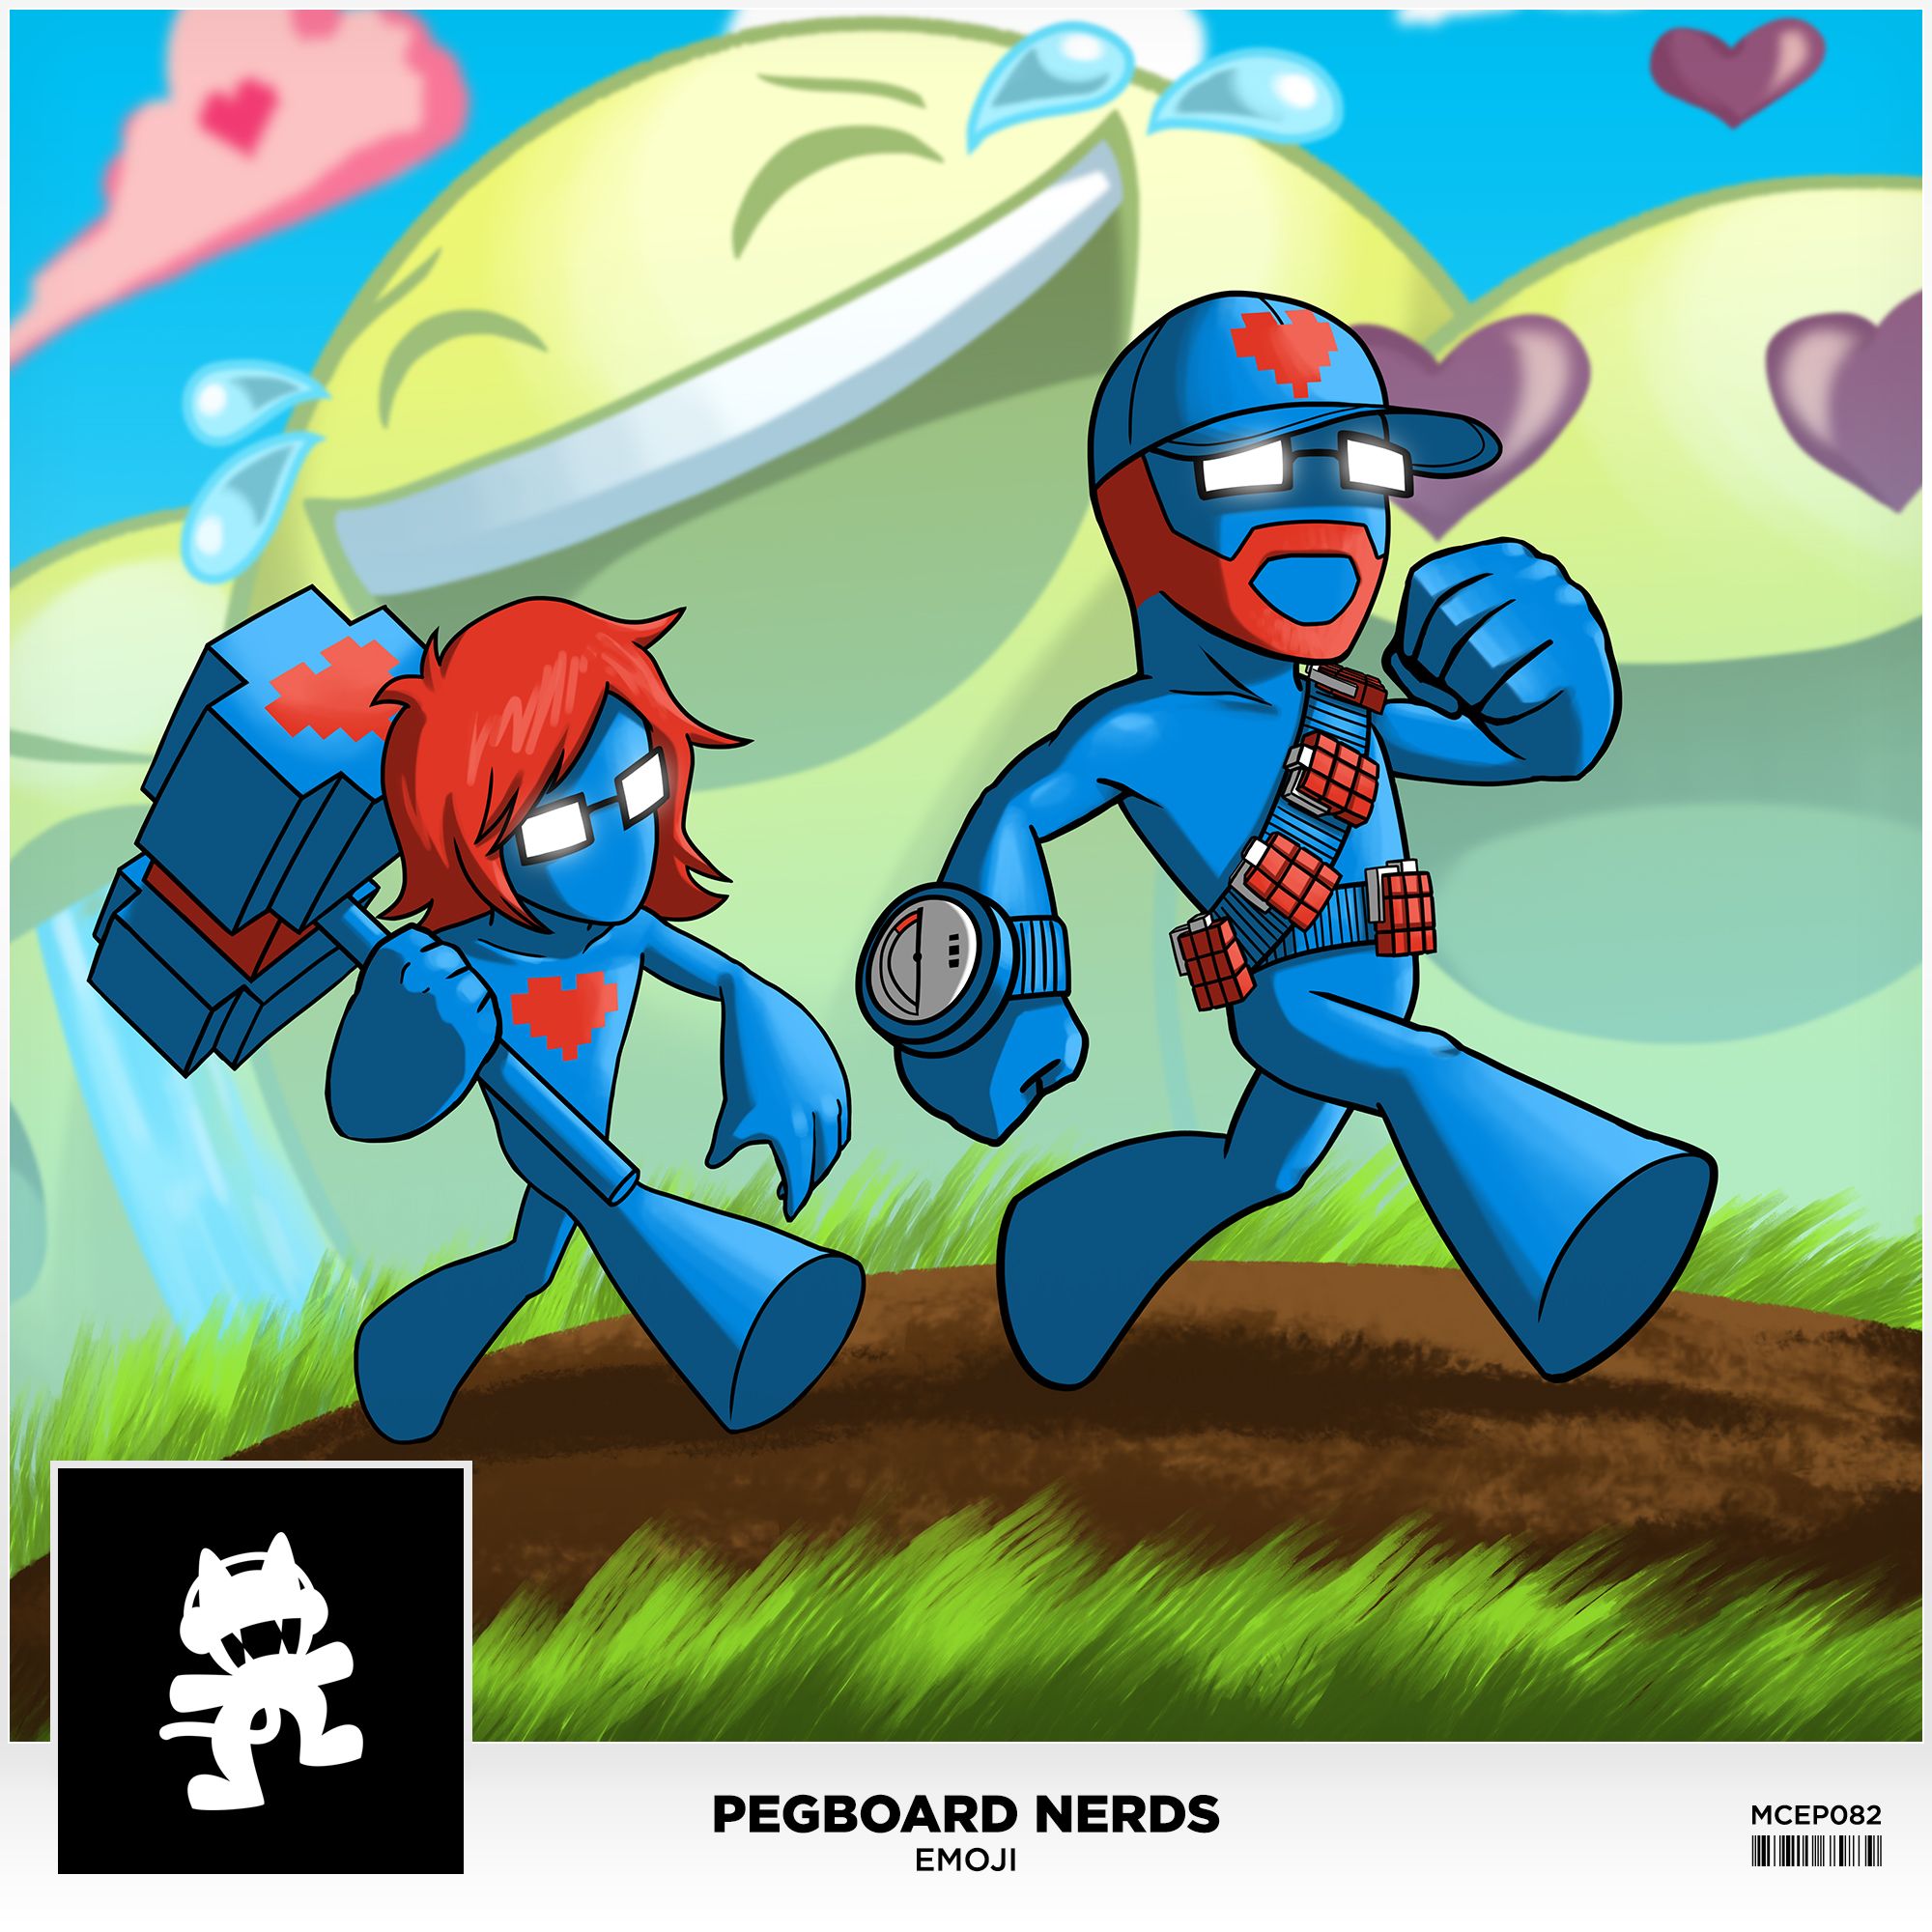 Pegboard Nerds Wallpapers